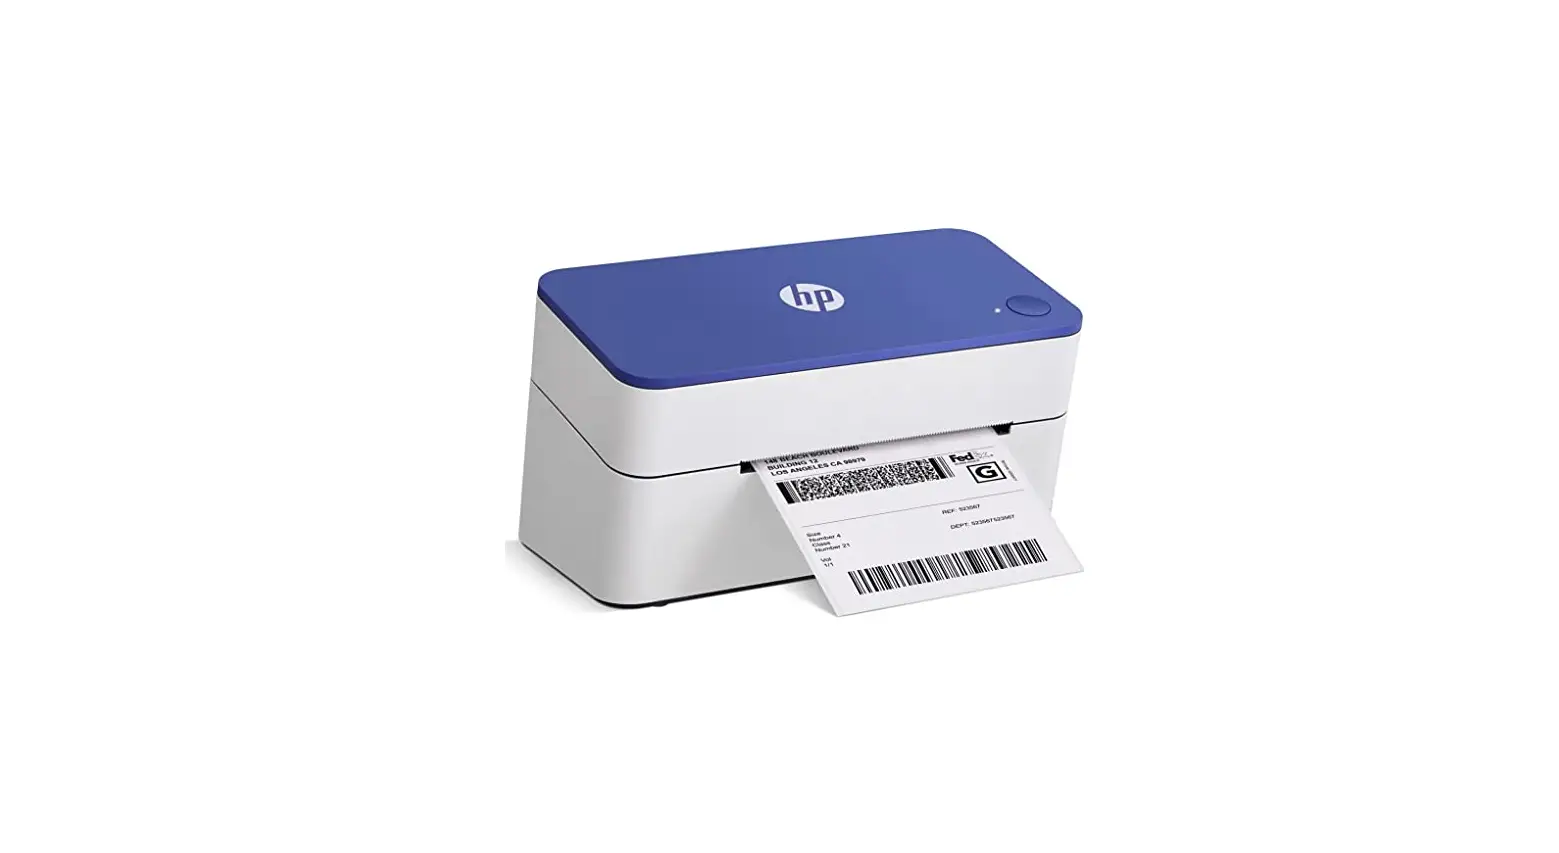 How to Connect Your Label Printer to UPS.com on Windows